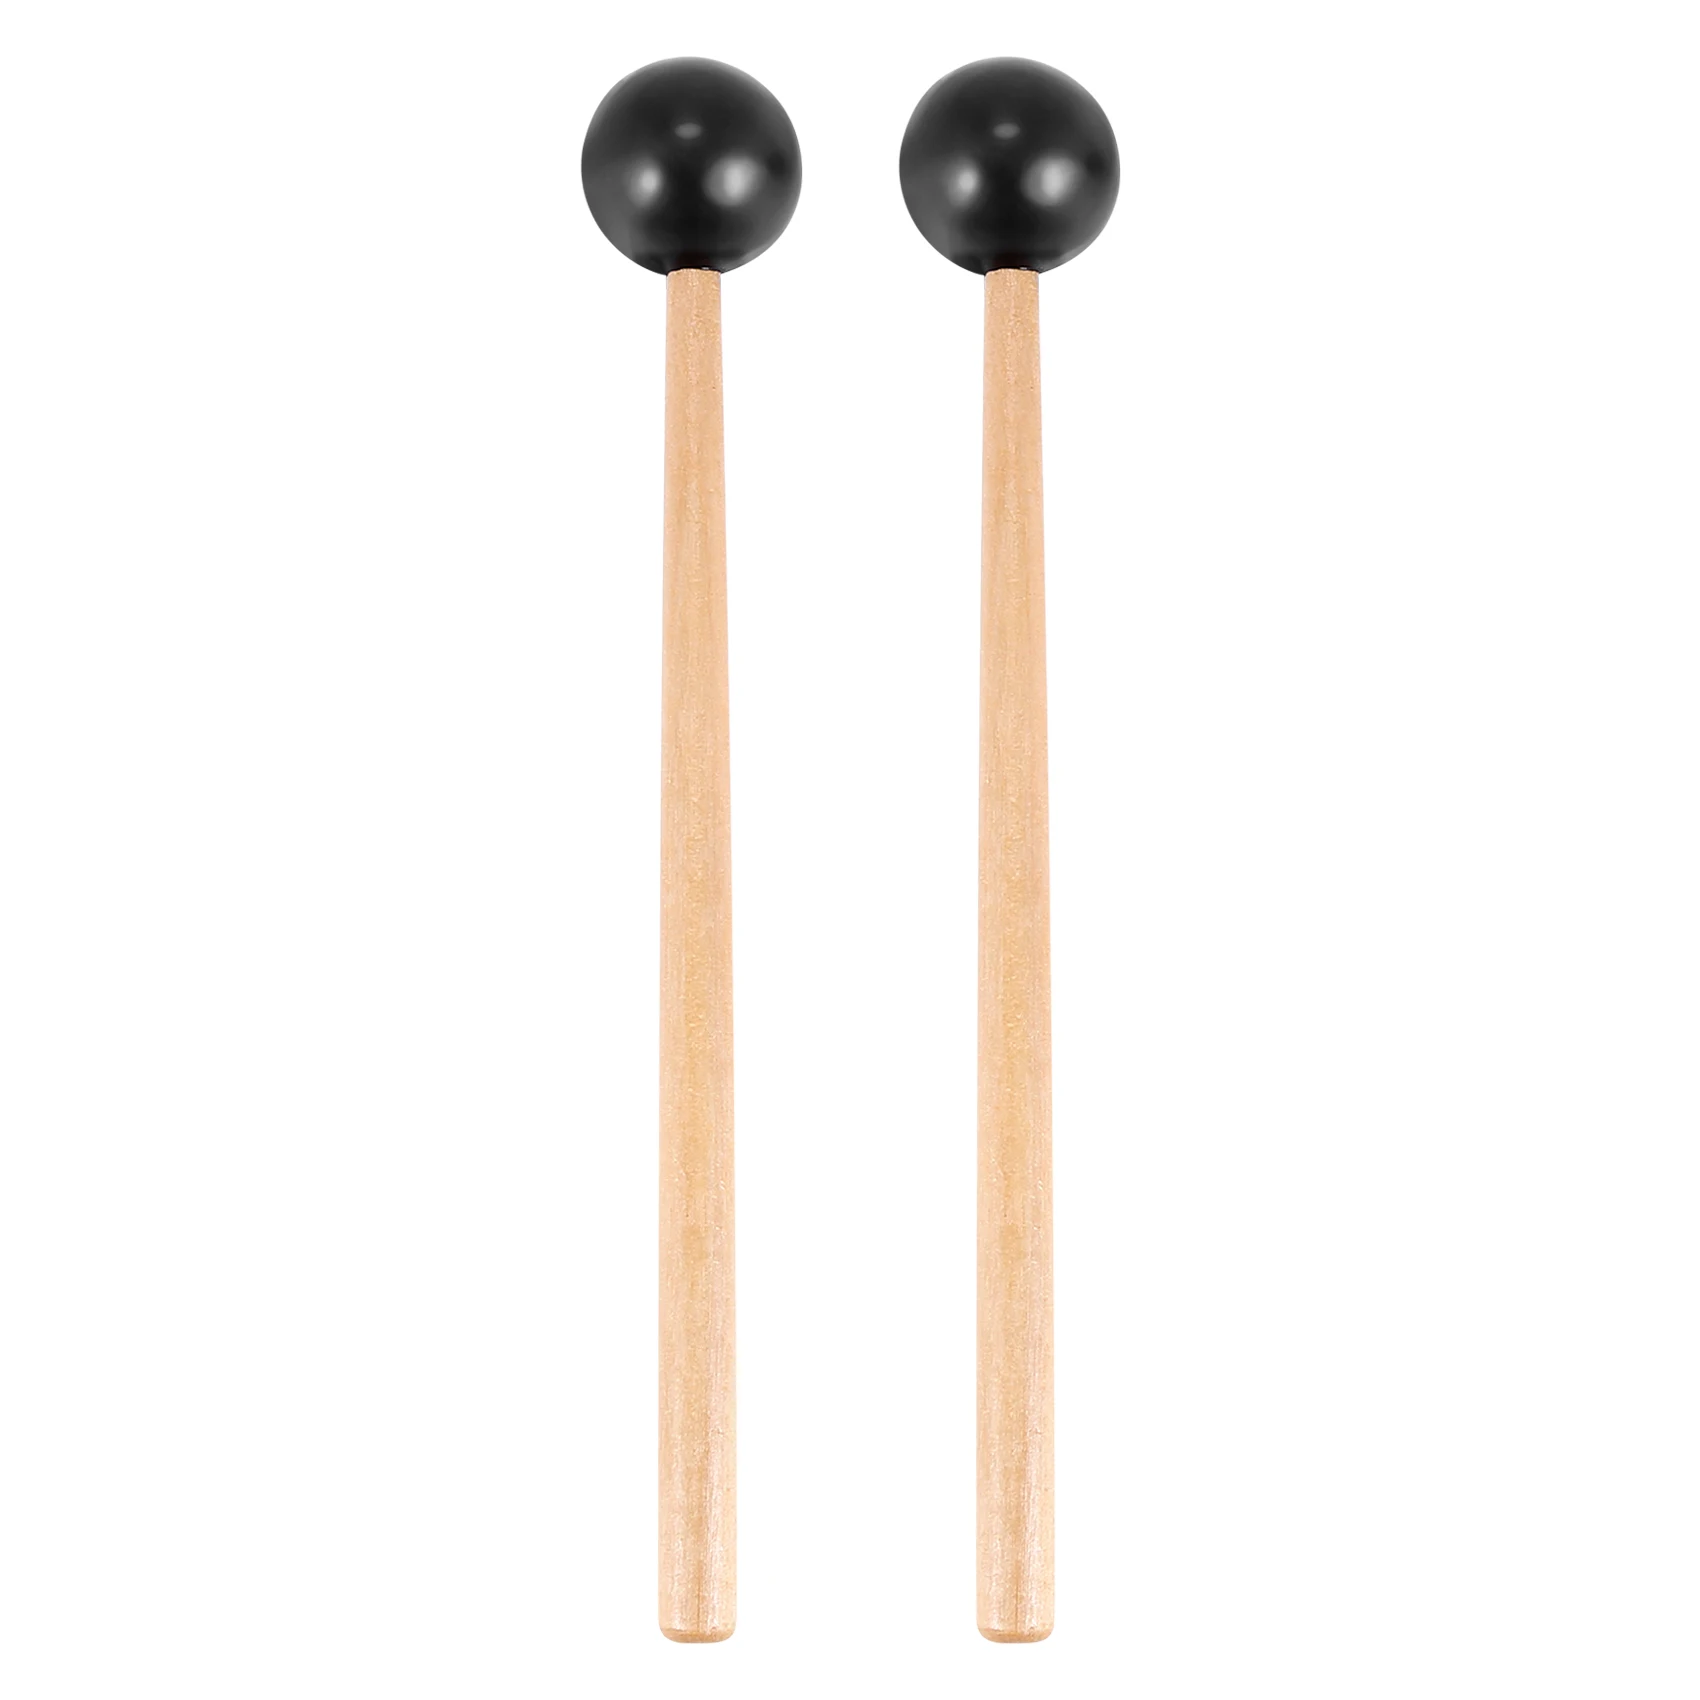 

2Pcs Soft Rubber Head Sticks Wood Handle Bell Mallets for Glockenspiel Xylophone Bell Music Instruments Parts Black